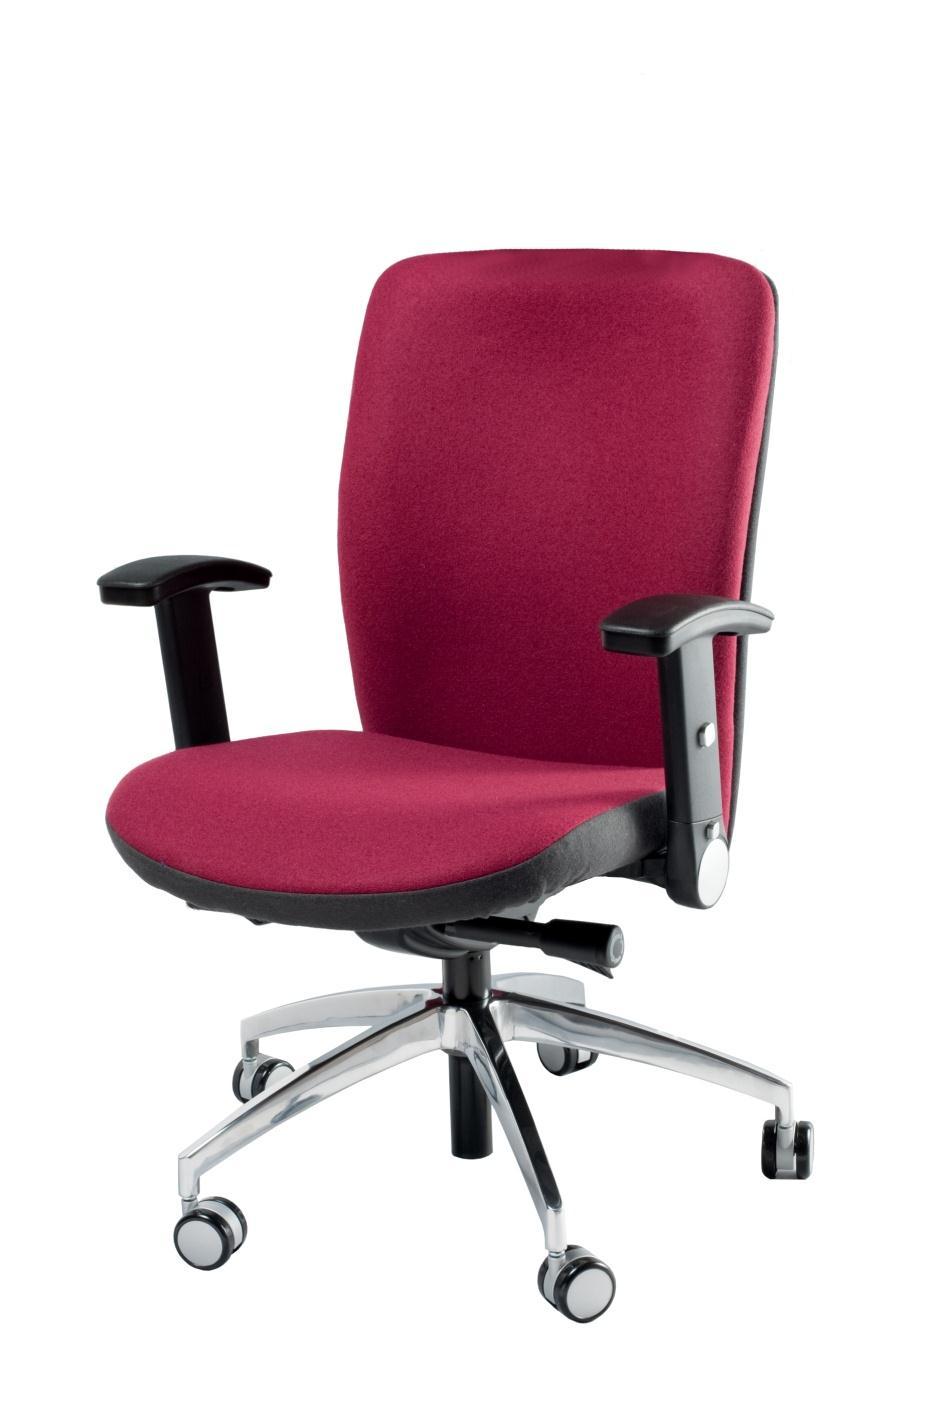 Balmoral BA02 High back, fully upholstered, ergonomic task chair. Features: - Synchronous mechanism.